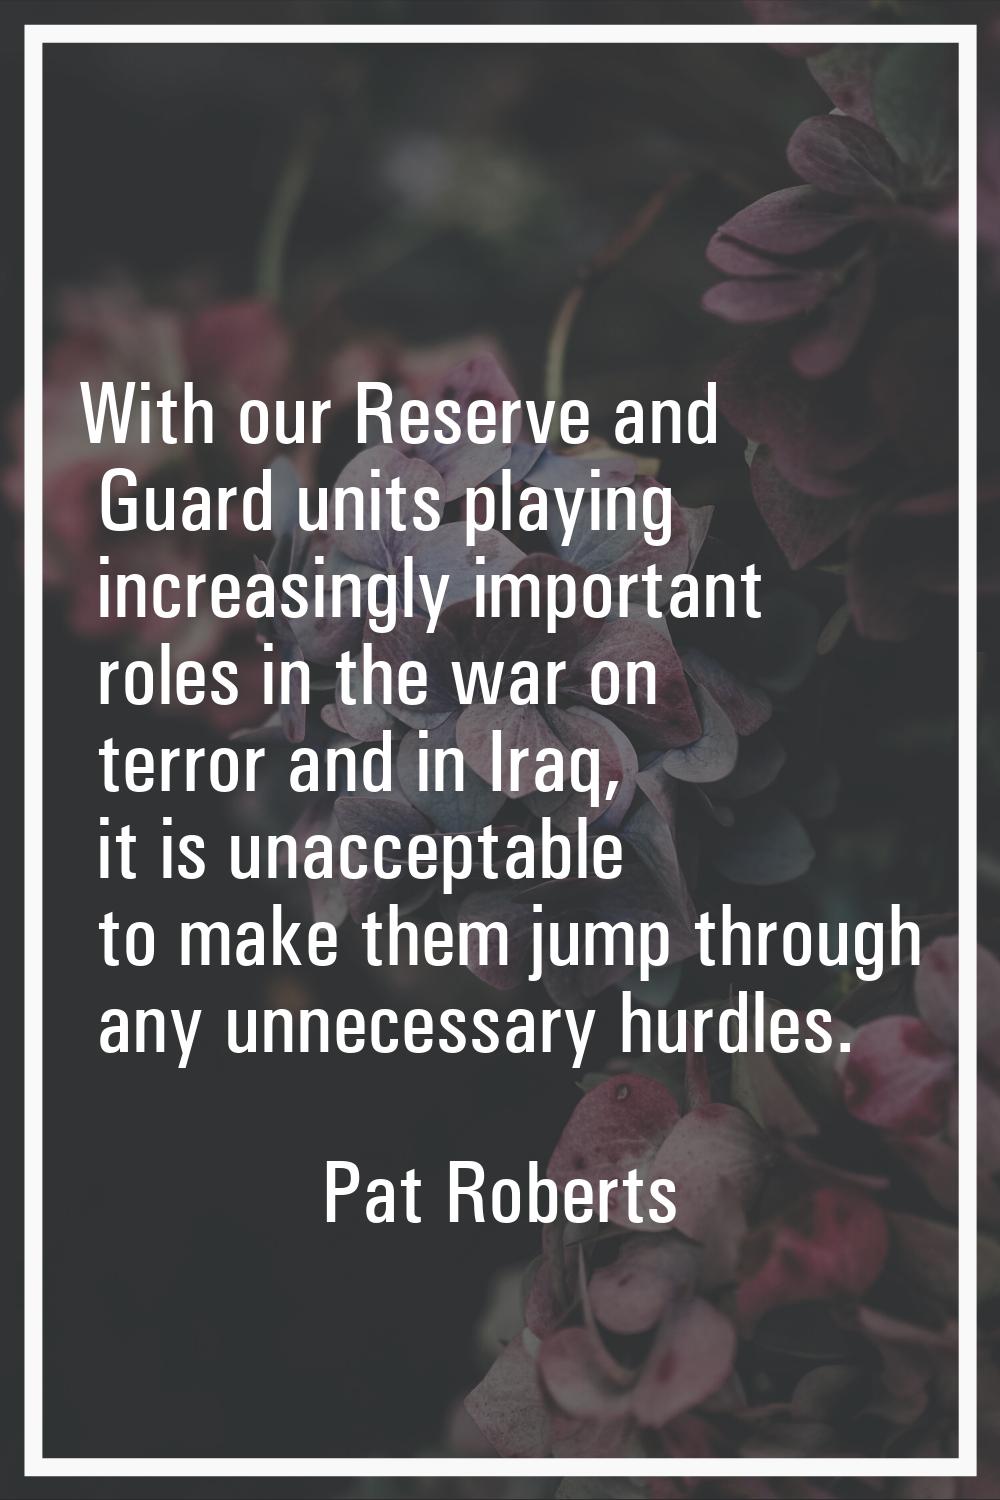 With our Reserve and Guard units playing increasingly important roles in the war on terror and in I